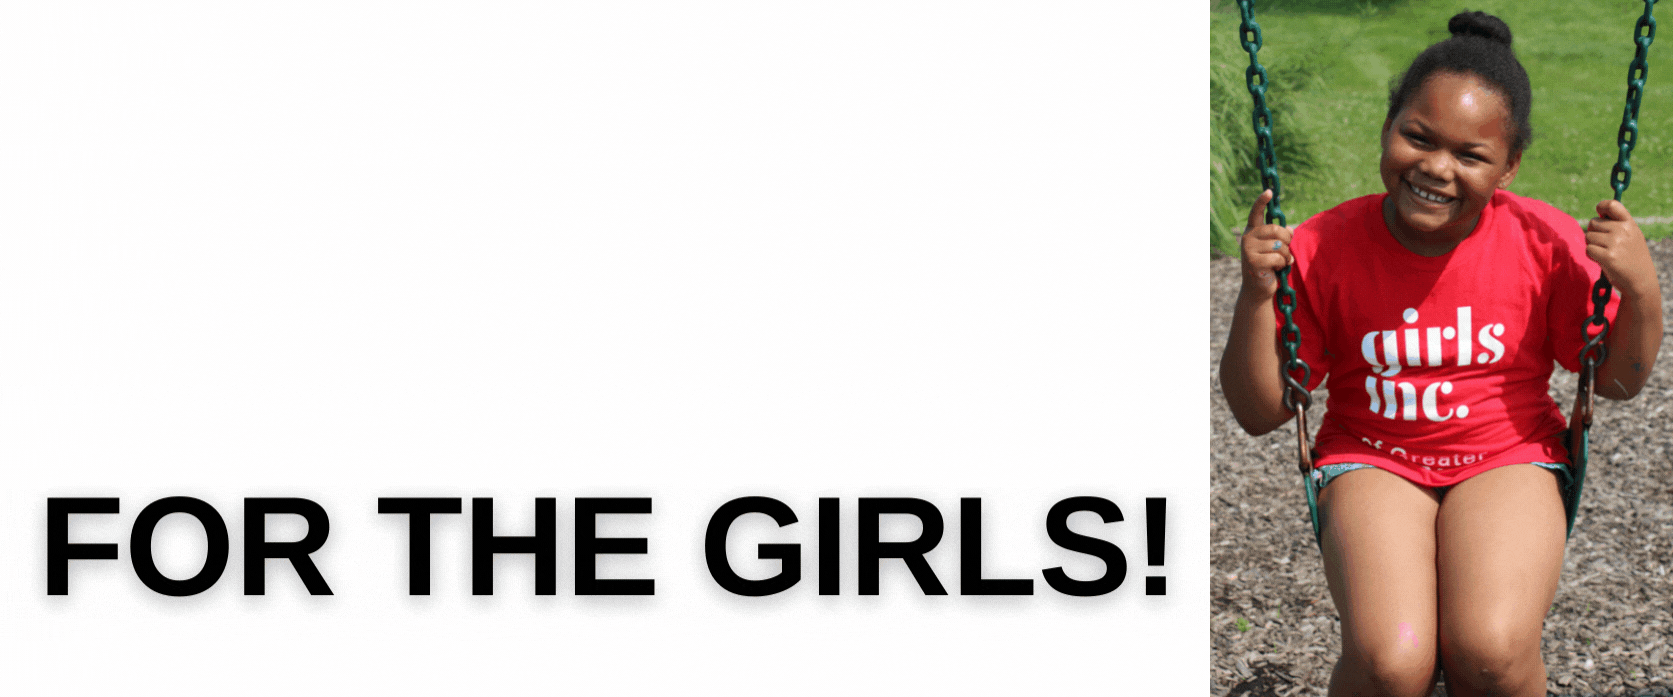 Copy of FOR THE GIRLS! (1).gif